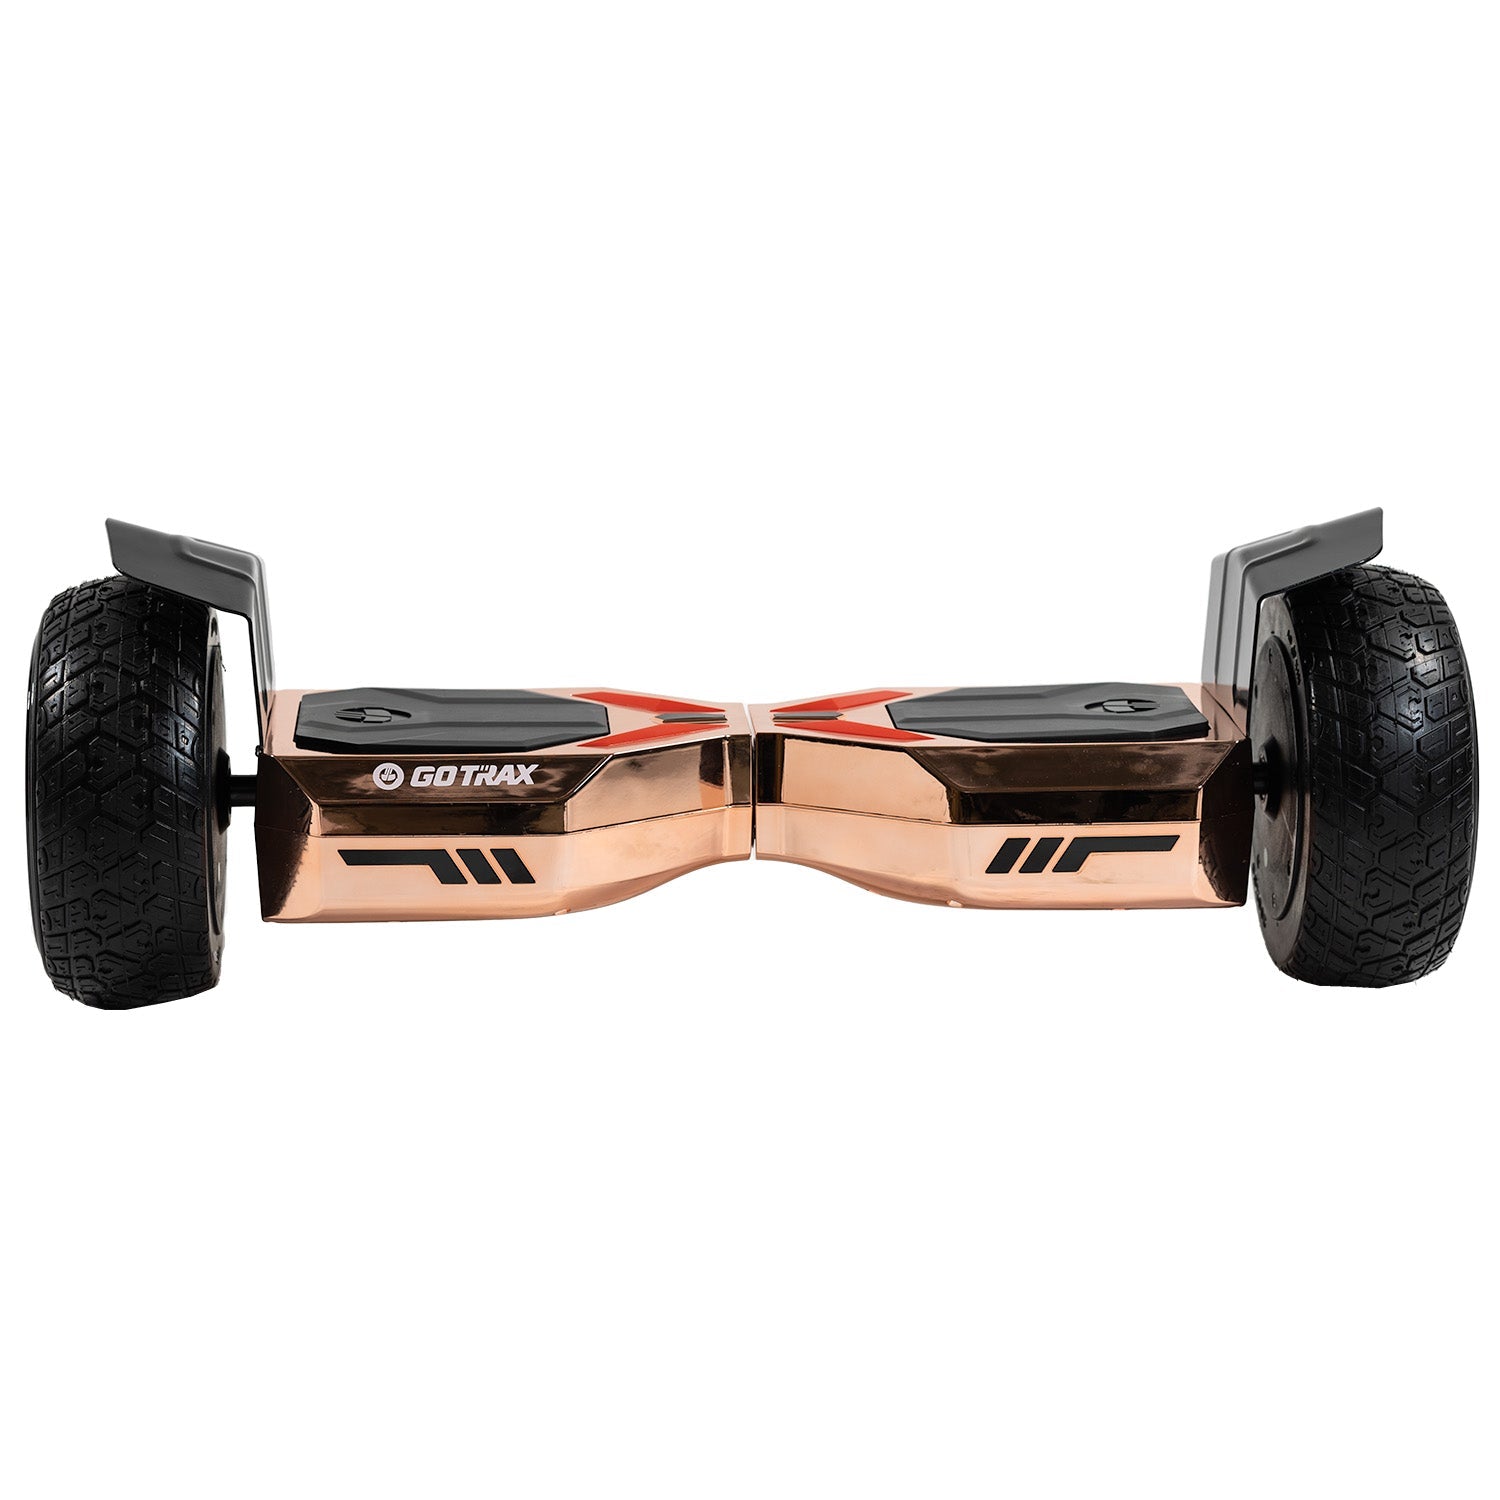 GOTRAX E5 Off Road Infinity Wheel Hoverboard 8